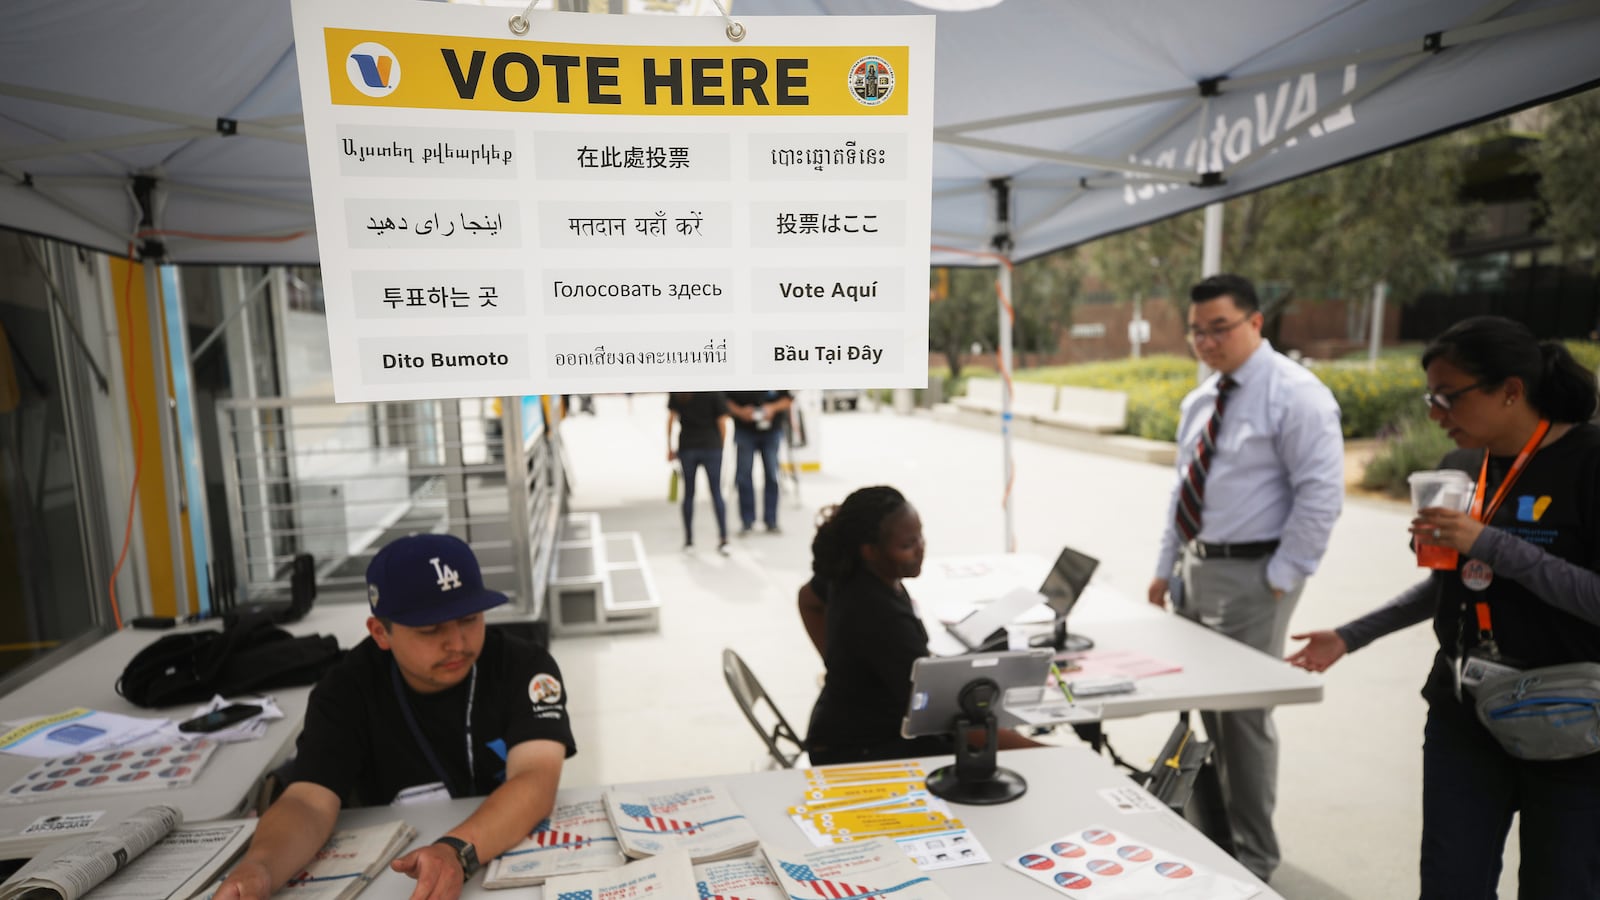 A voter checks in before entering a voting booth during early voting for the 2020 California presidential primary election ahead of Super Tuesday.